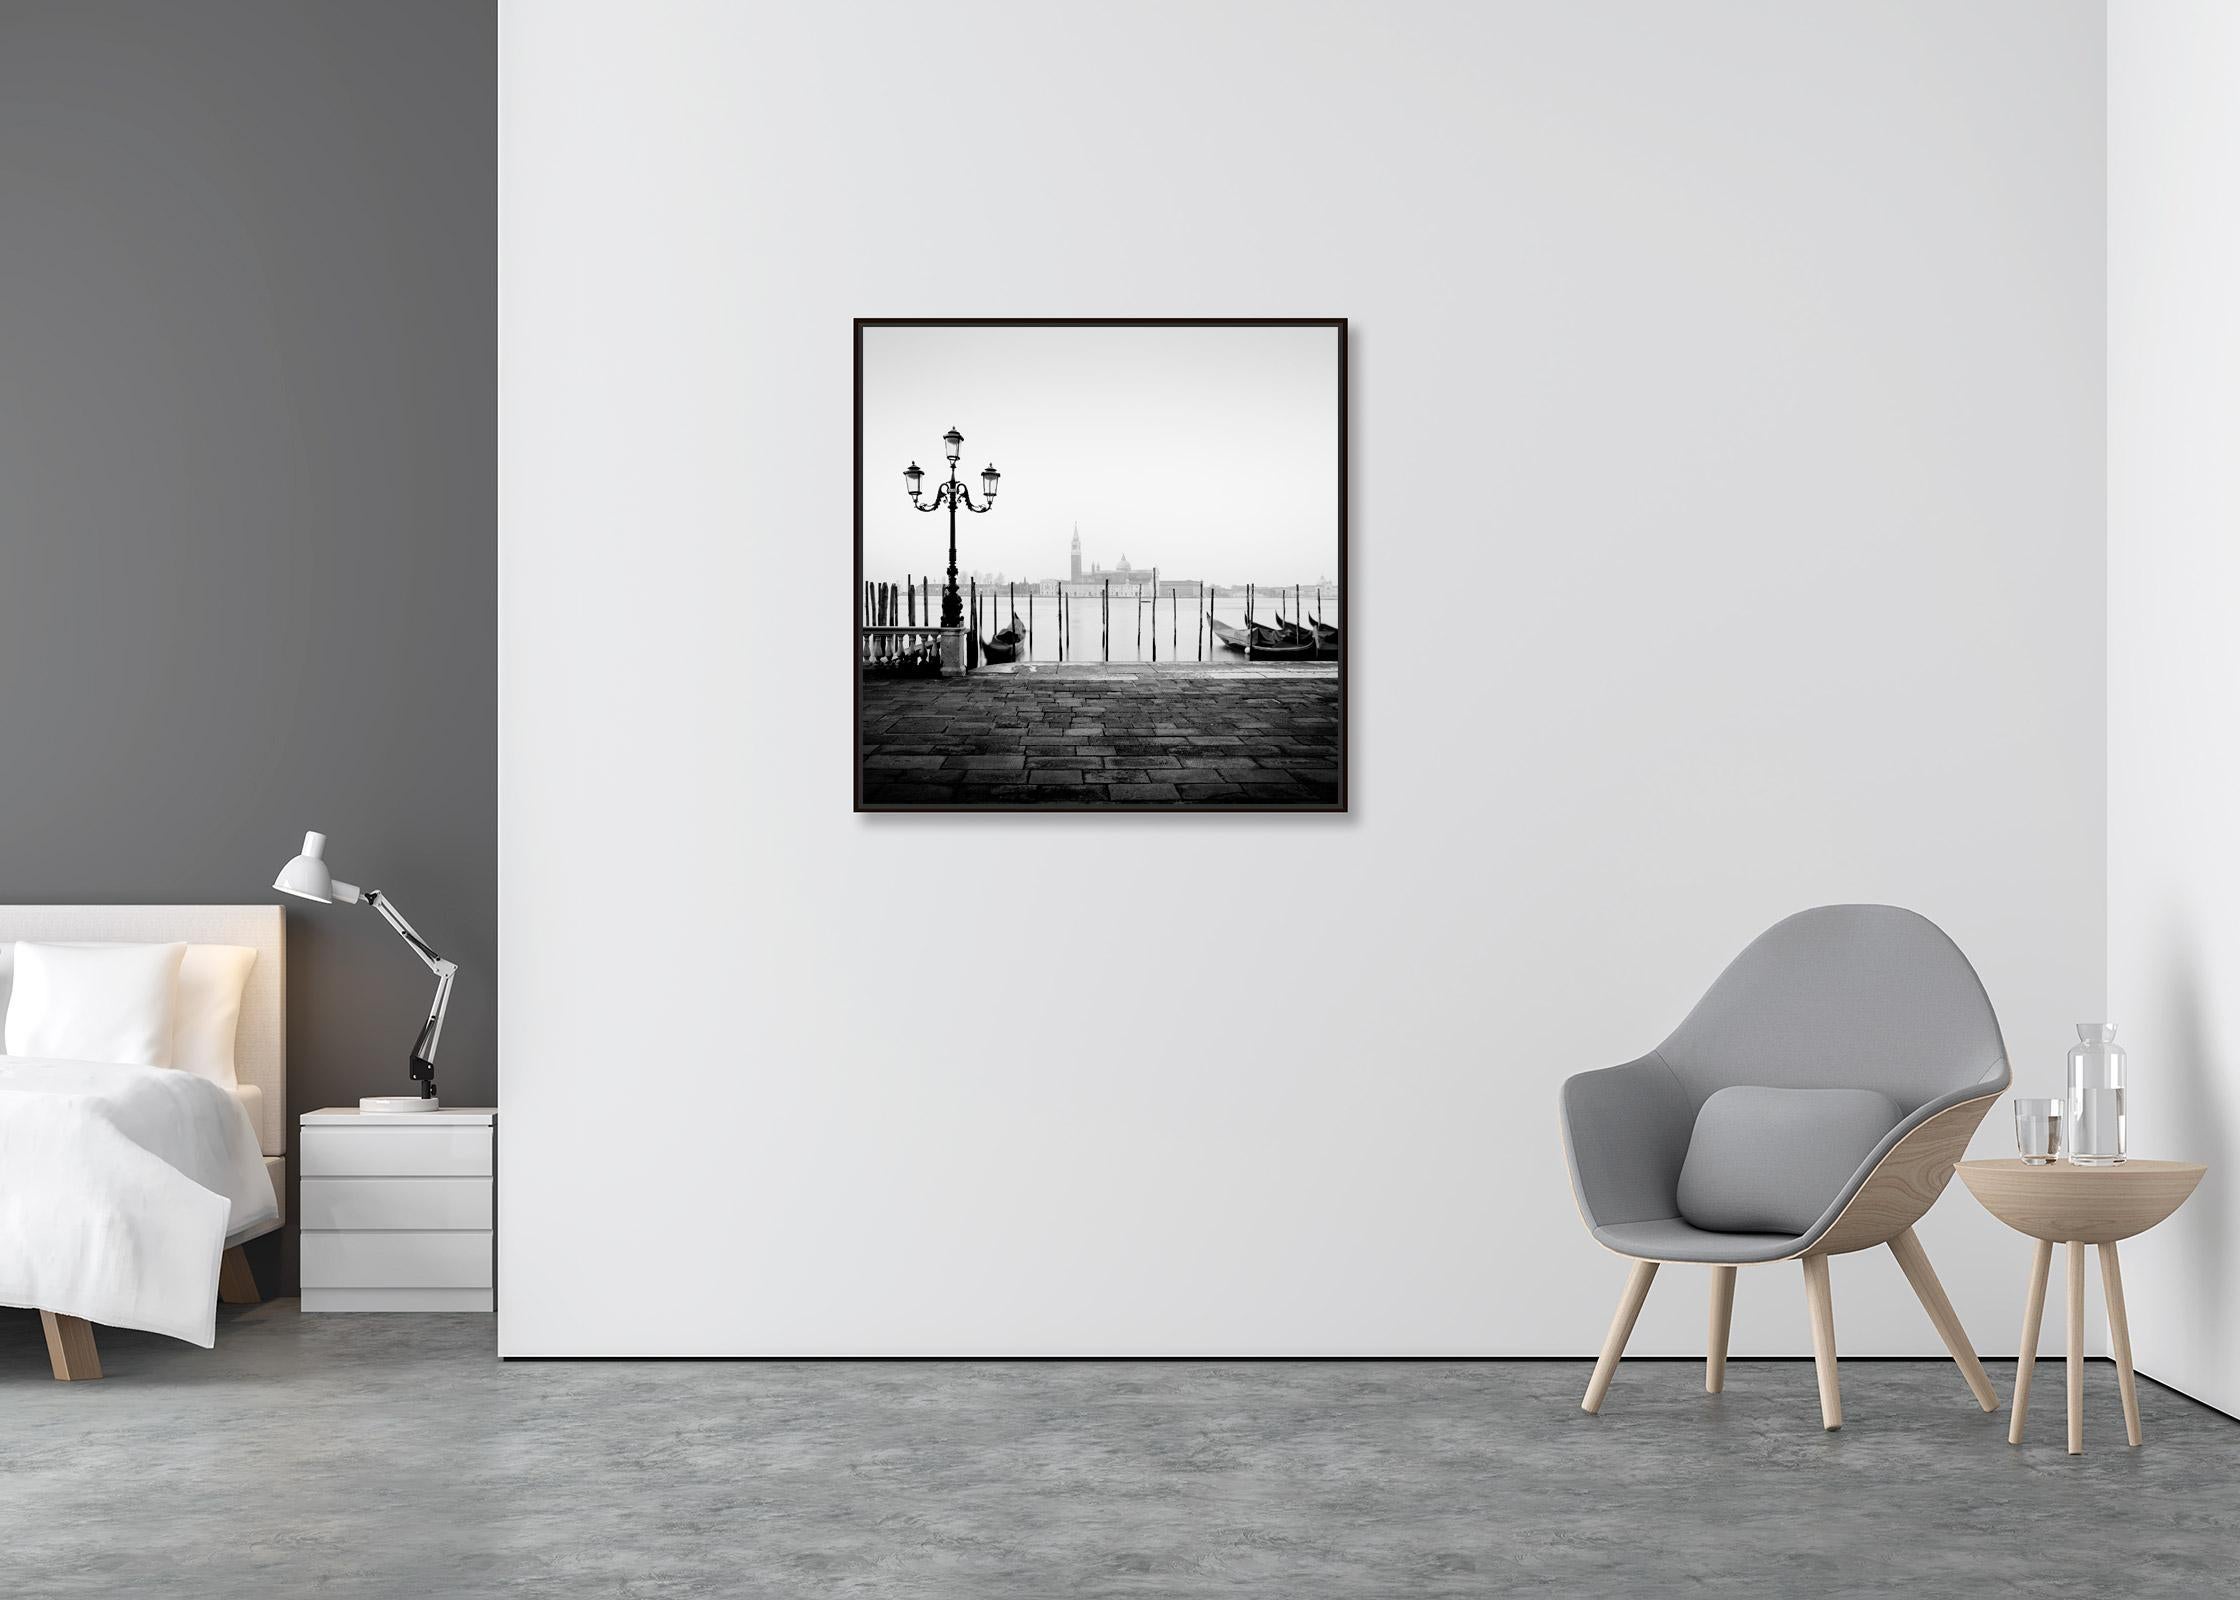 More Free Space Basilica Venice Italy black white fine art landscape photography - Minimalist Photograph by Gerald Berghammer